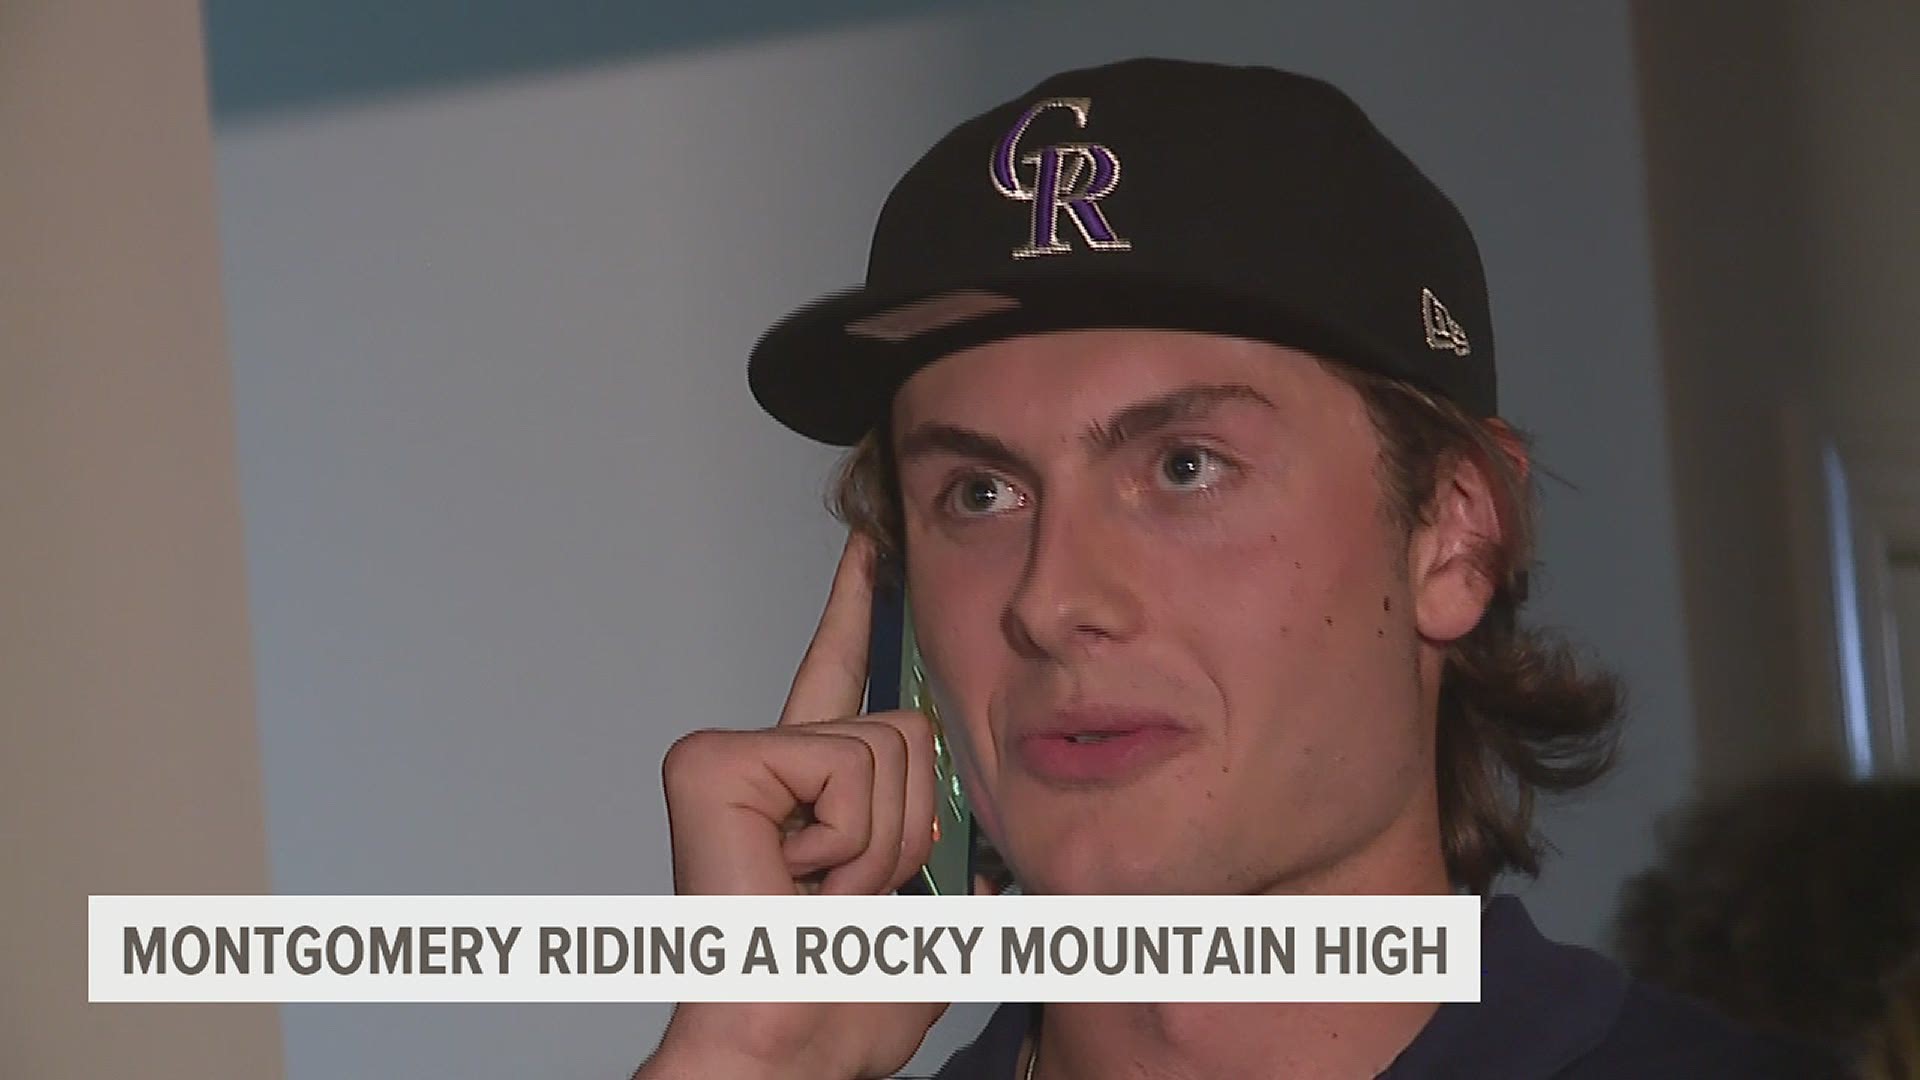 A crowd of family and friends erupted on Sunday night, as Benny Montgomery was selected by the Colorado Rockies with the 8th overall pick in the 2021 MLB Draft.